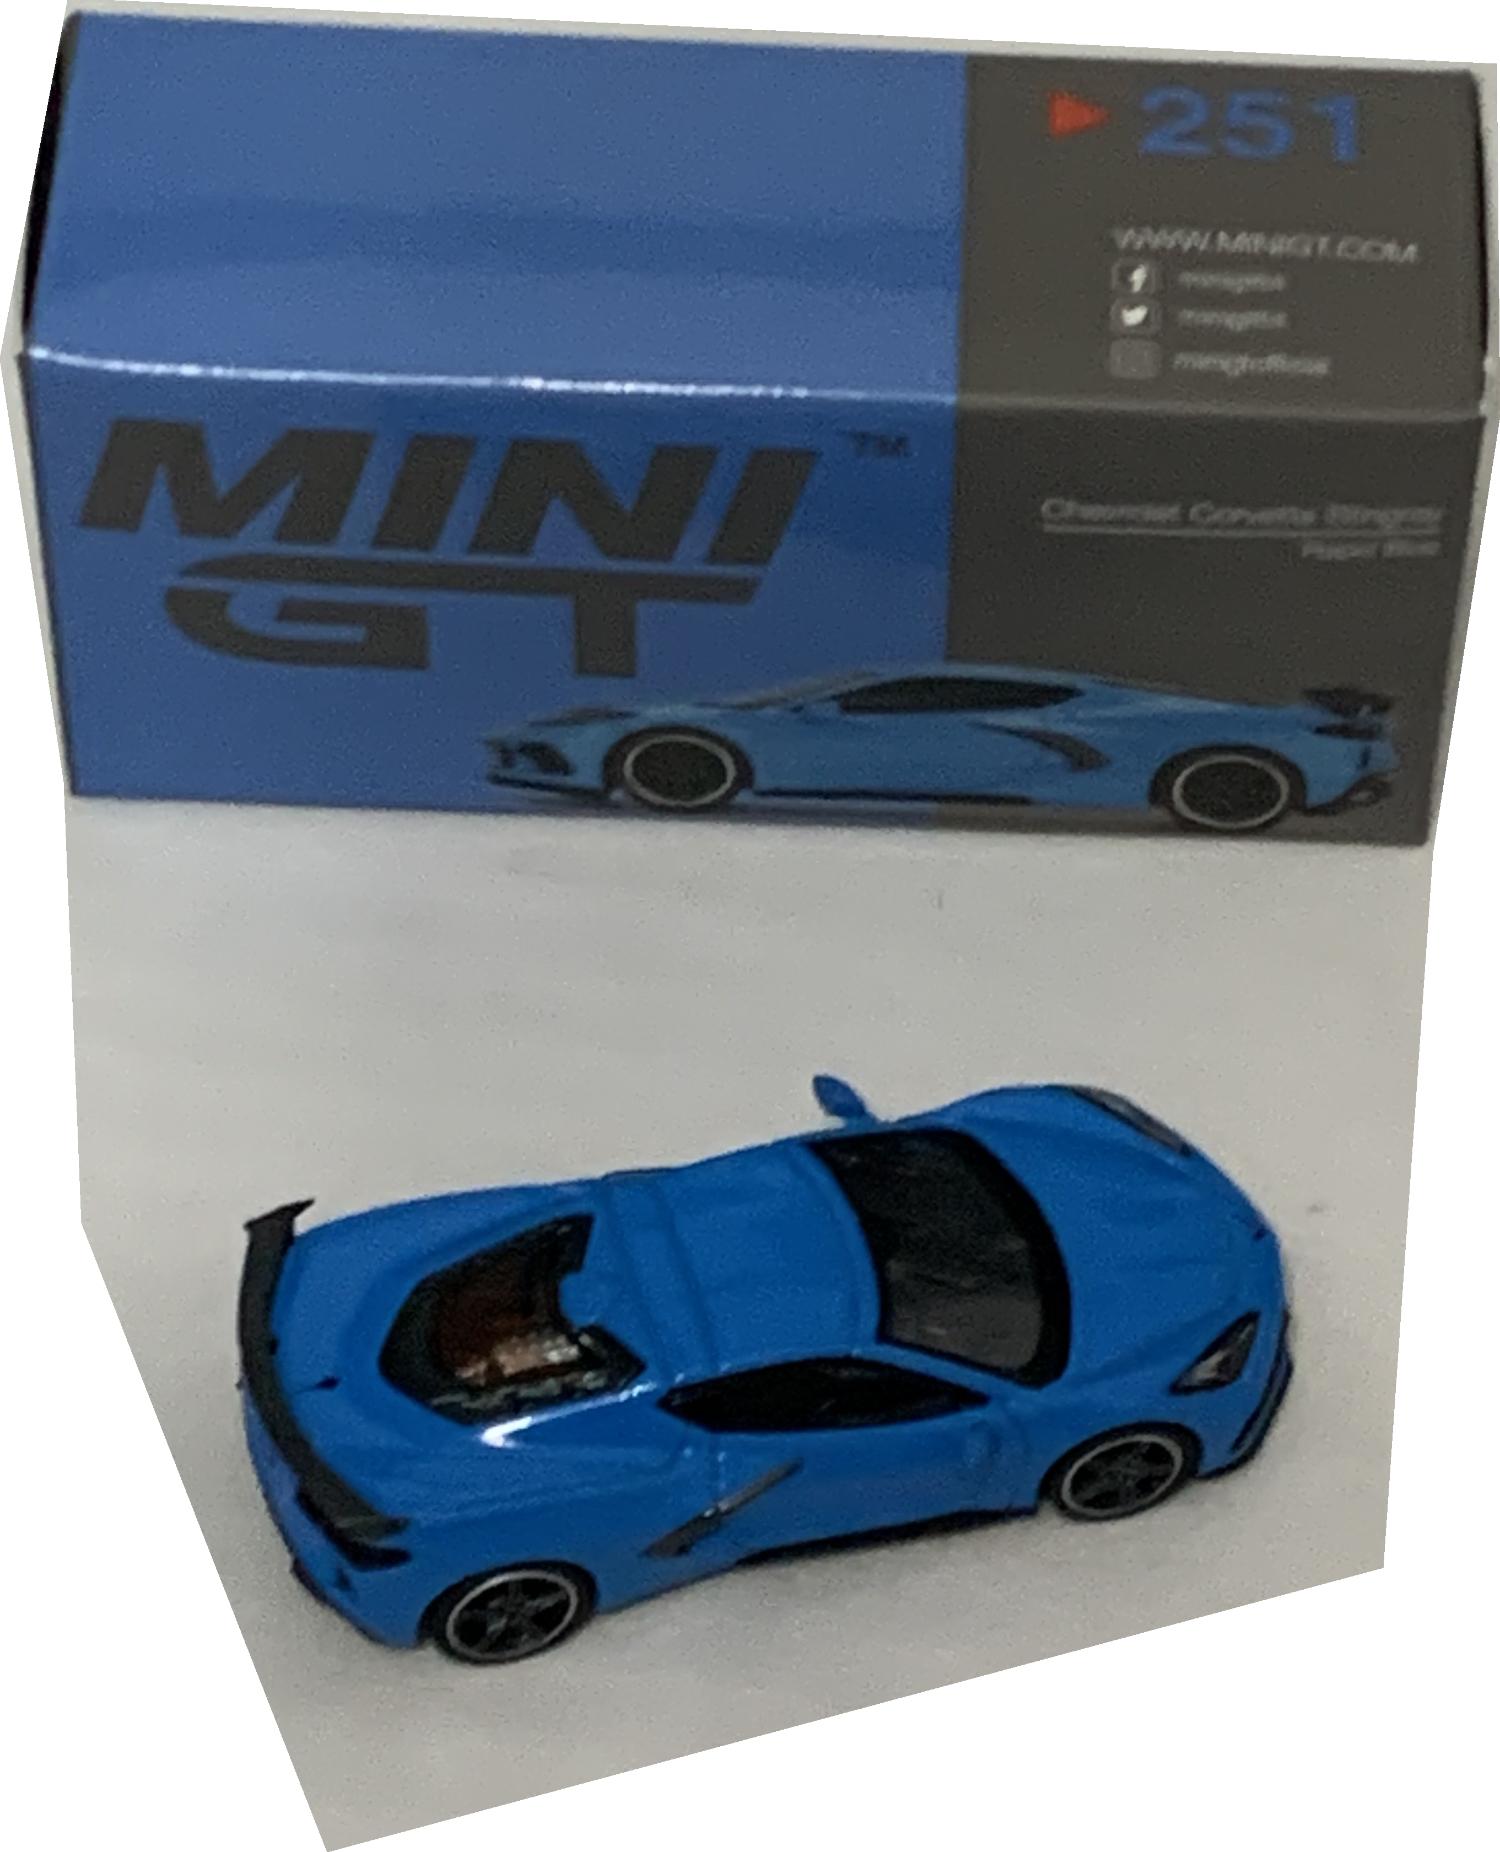 An excellent scale model of a Chevrolet Corvette Stingray decorated in rapid blue with high rear spoiler, side air vents